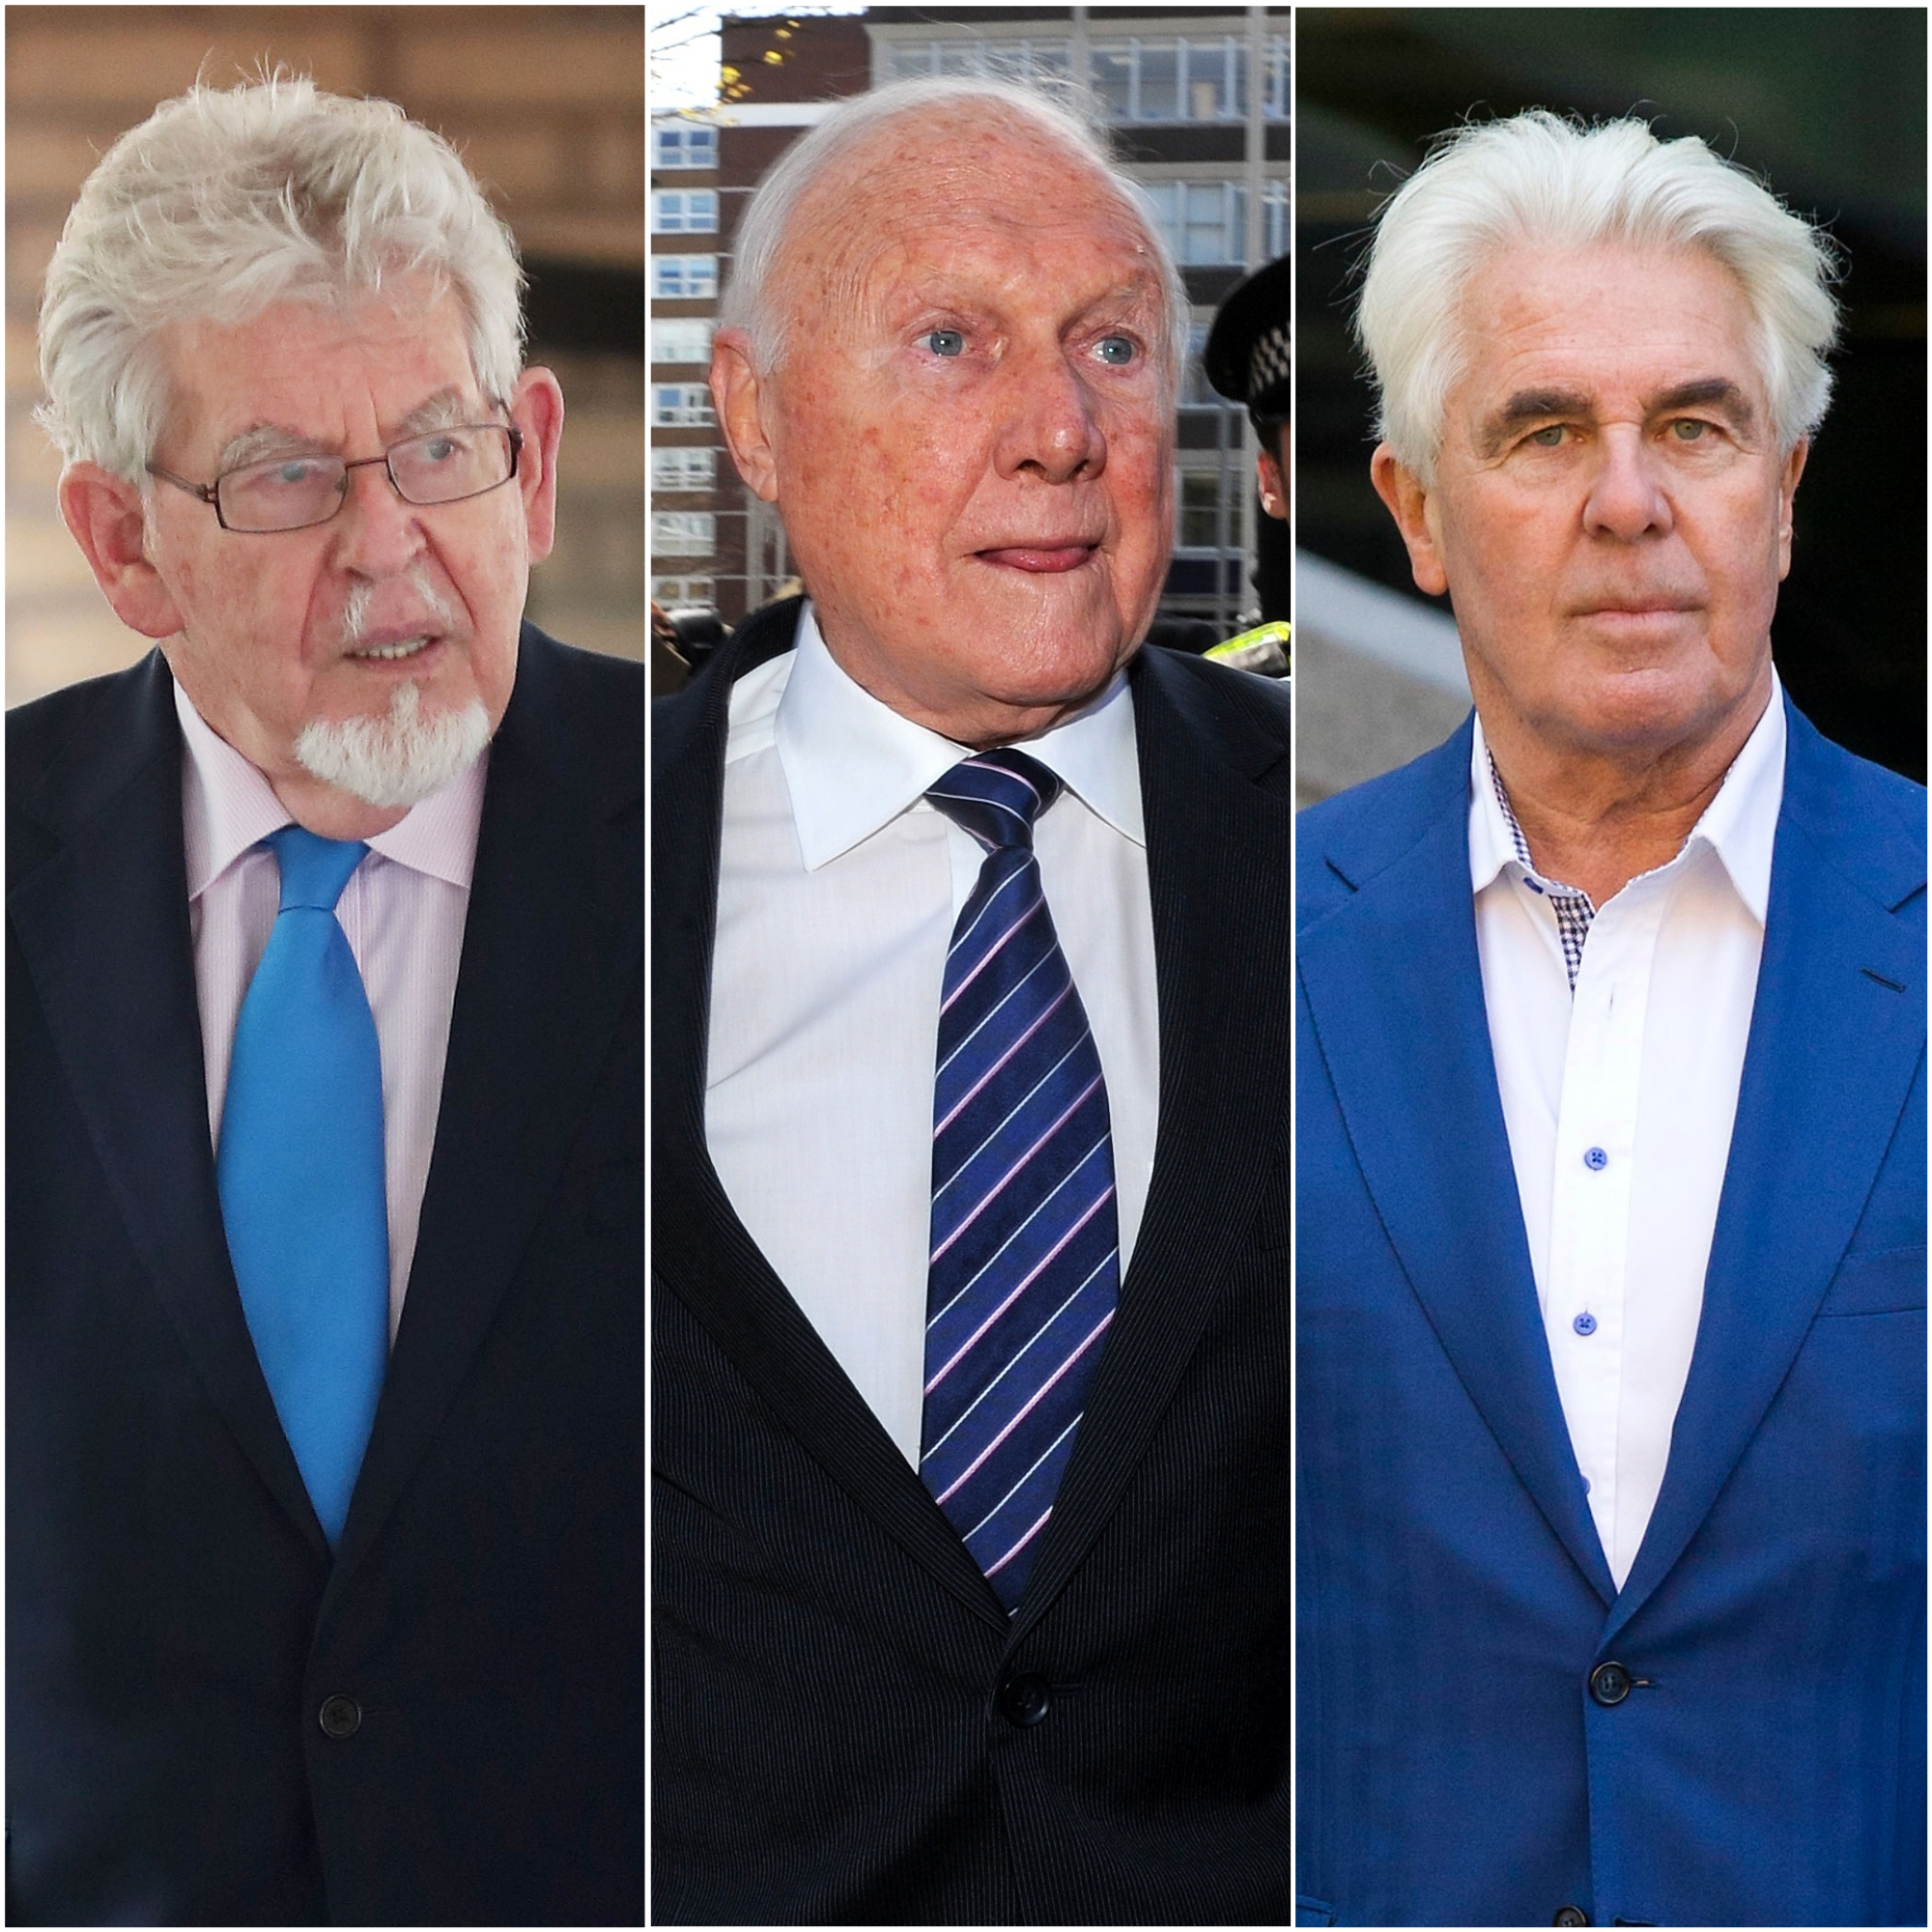 Rolf Harris, Stuart Hall and Max Clifford have all been convicted of sexual abuse (PA)